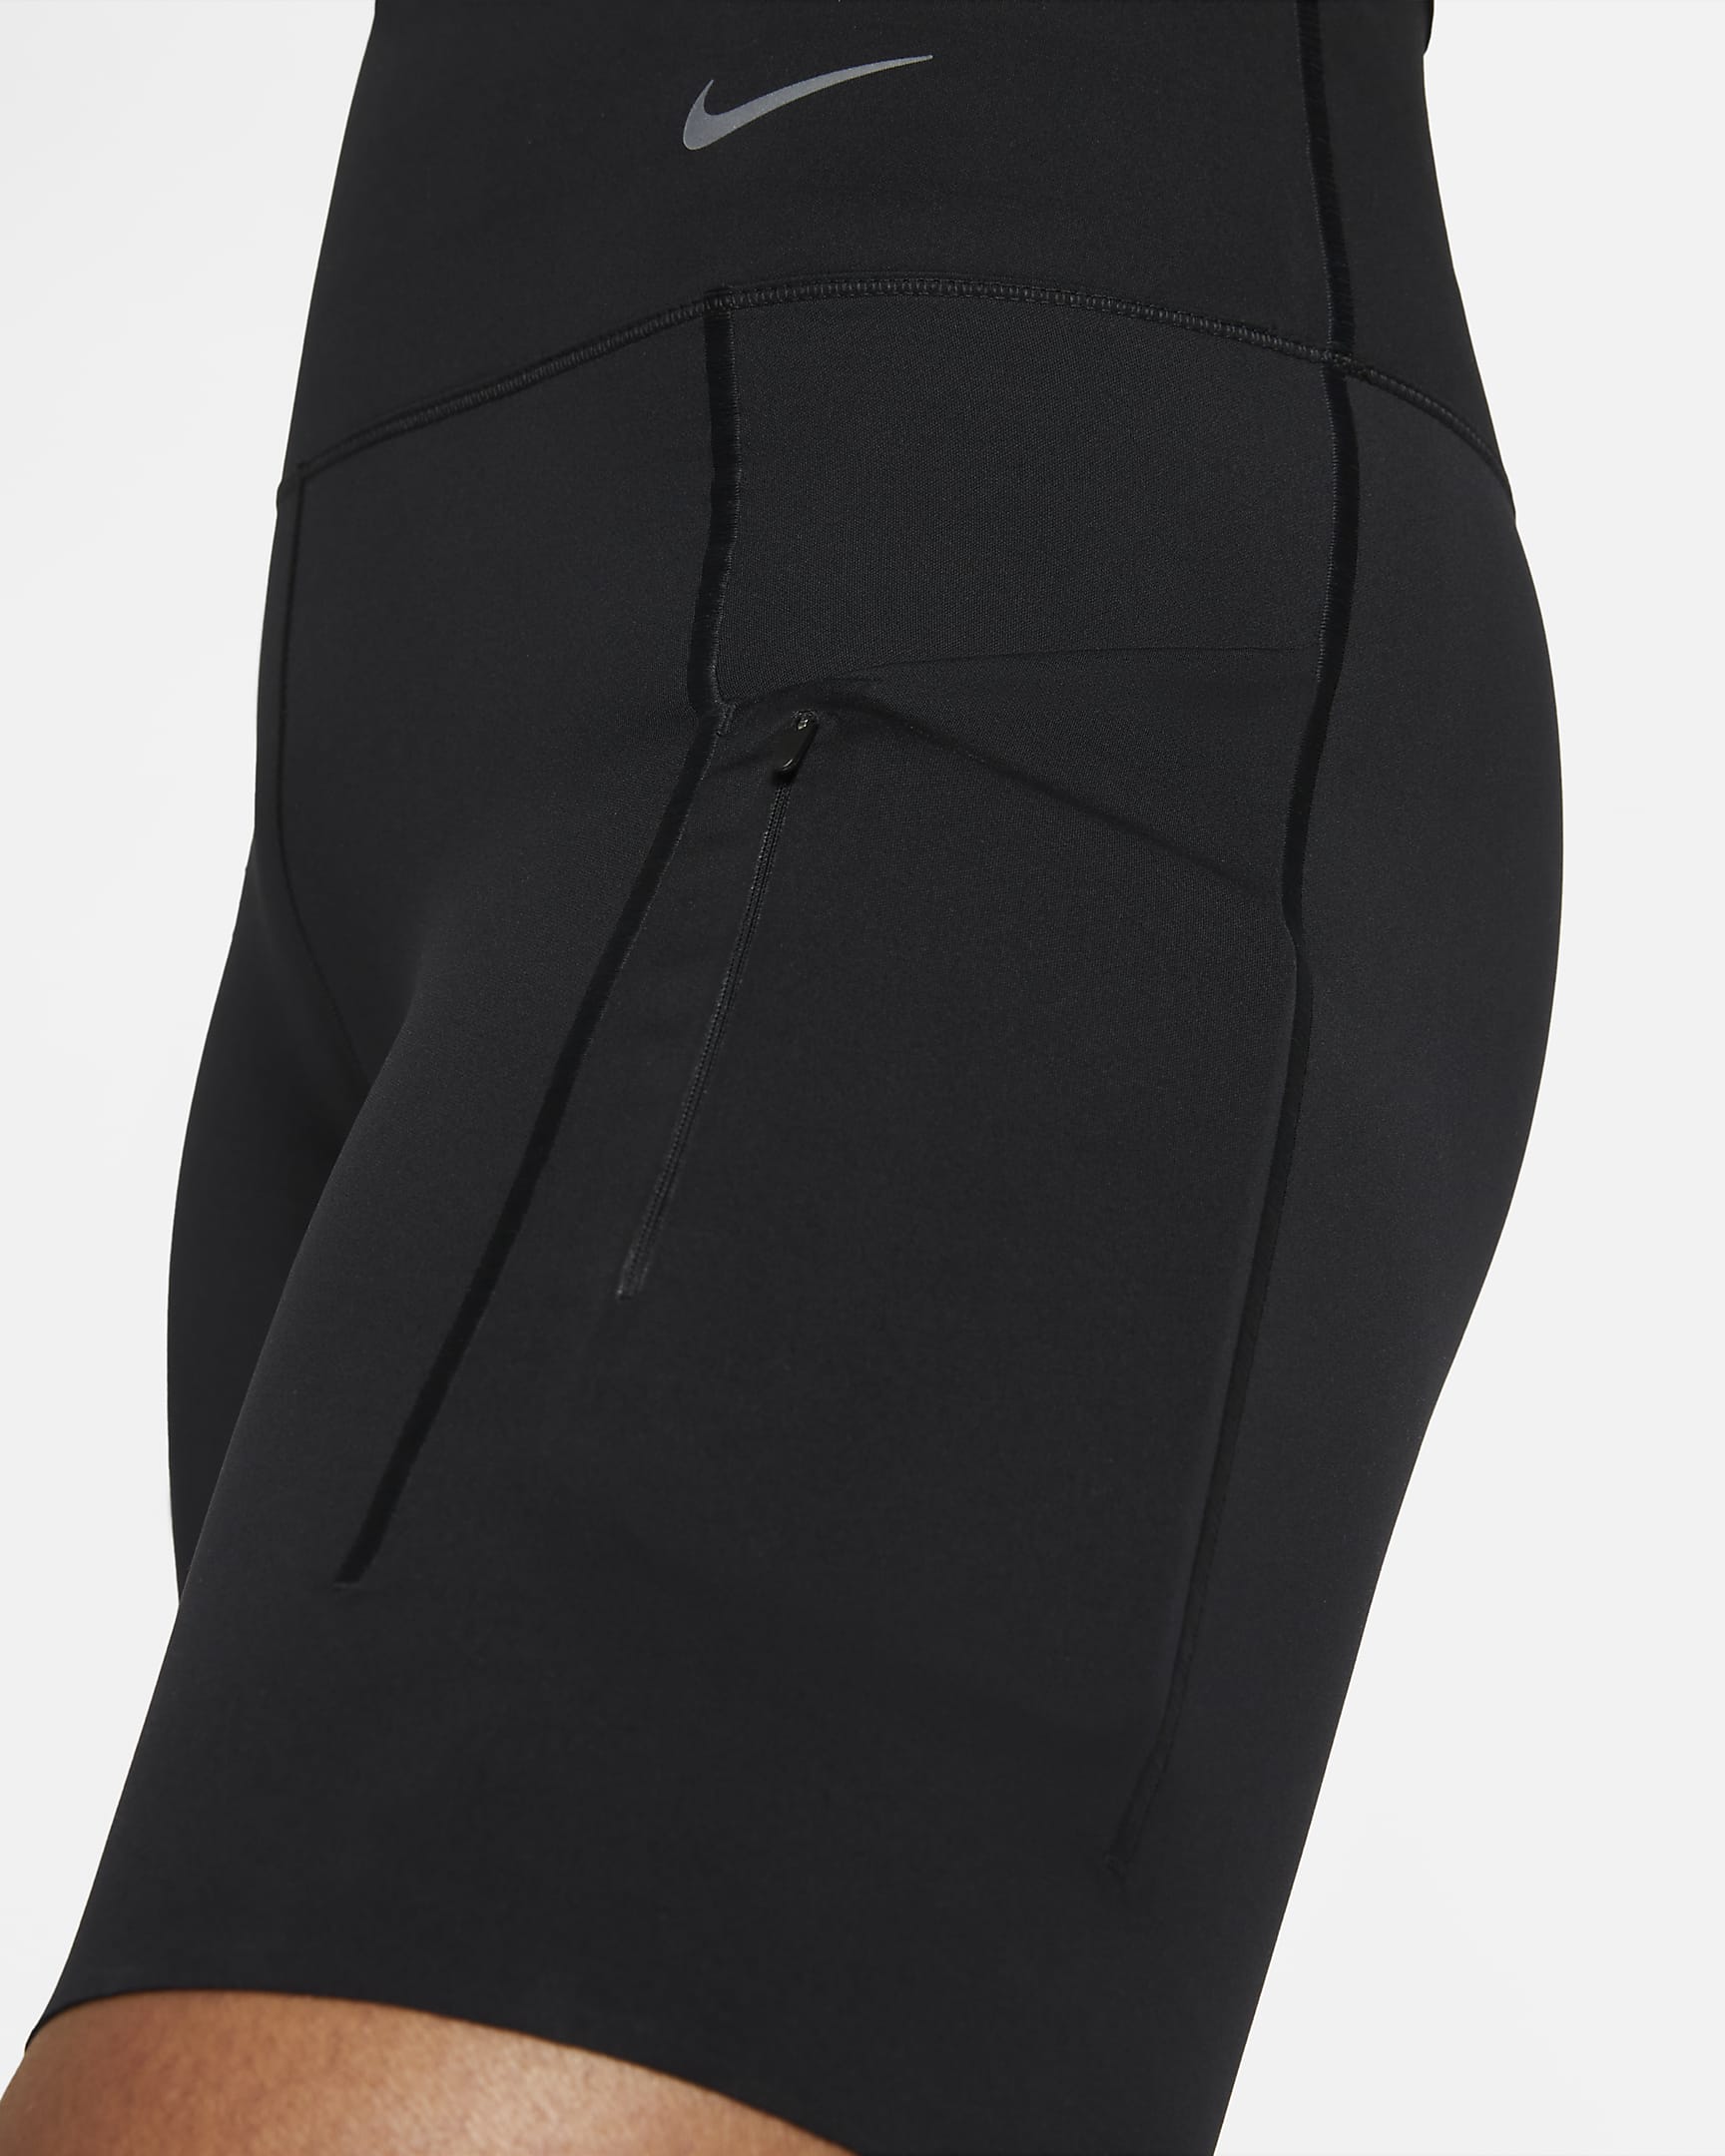 Nike Go Women's Firm-Support High-Waisted 20cm (approx.) Biker Shorts with Pockets - Black/Black